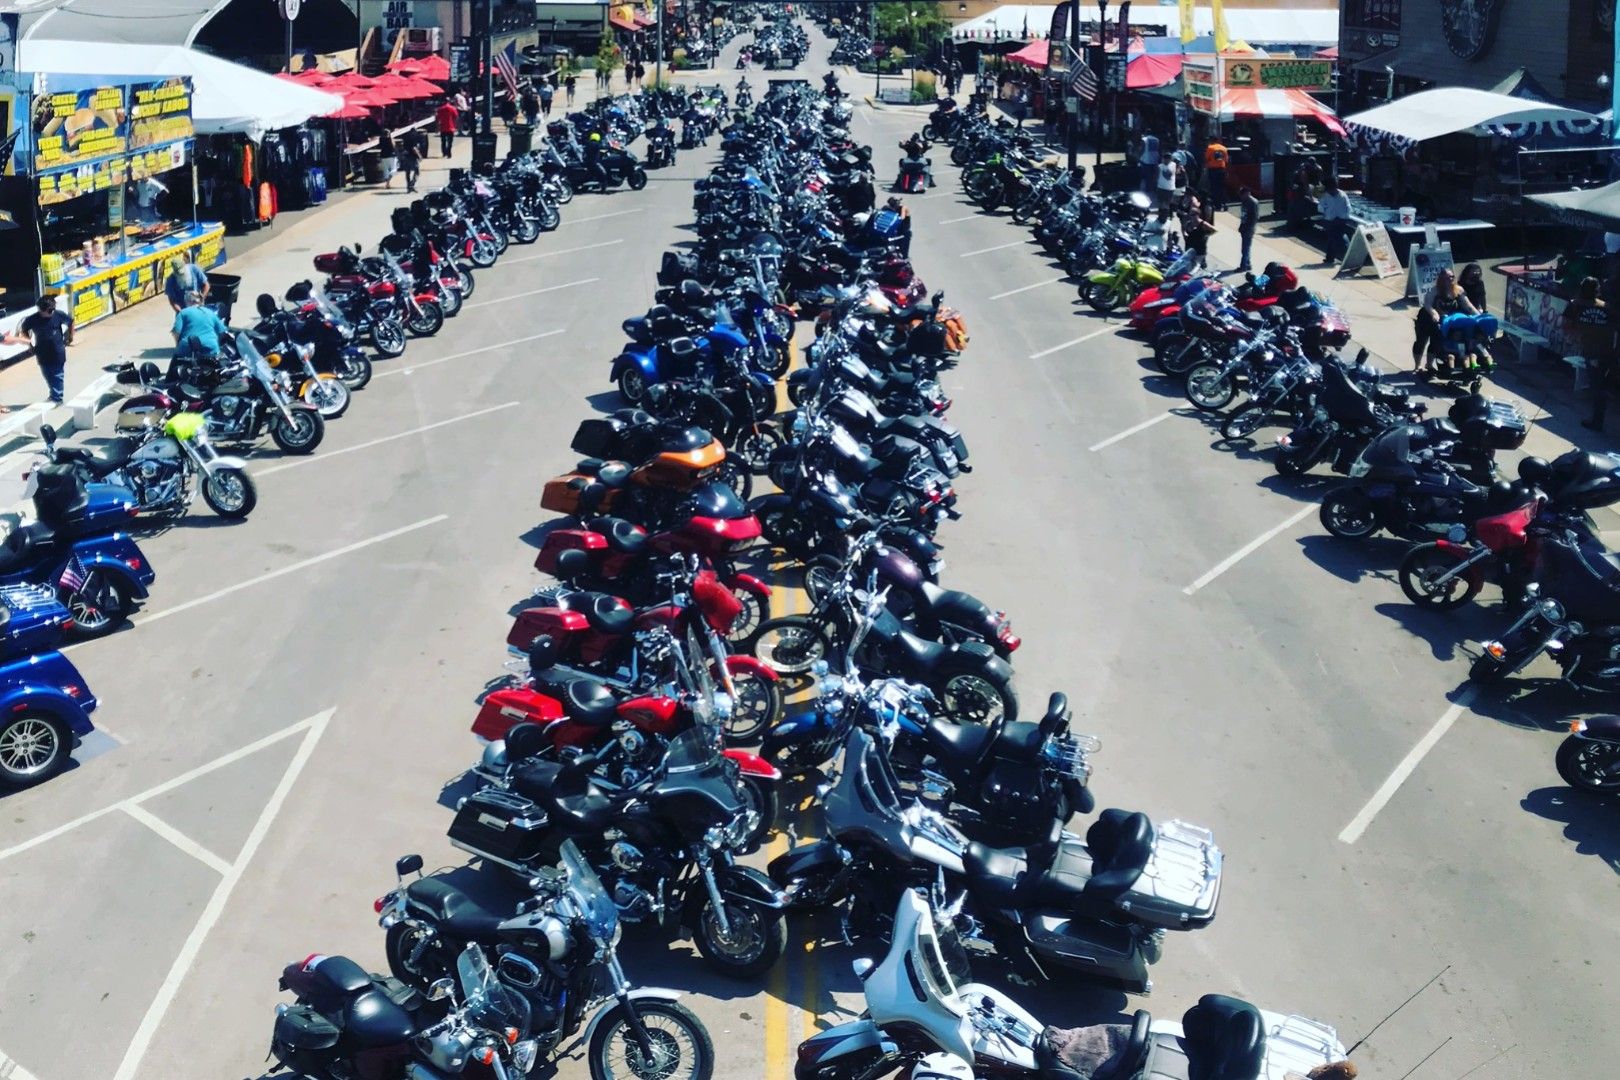 Sturgis City Council Supports 2020 Sturgis Motorcycle Rally